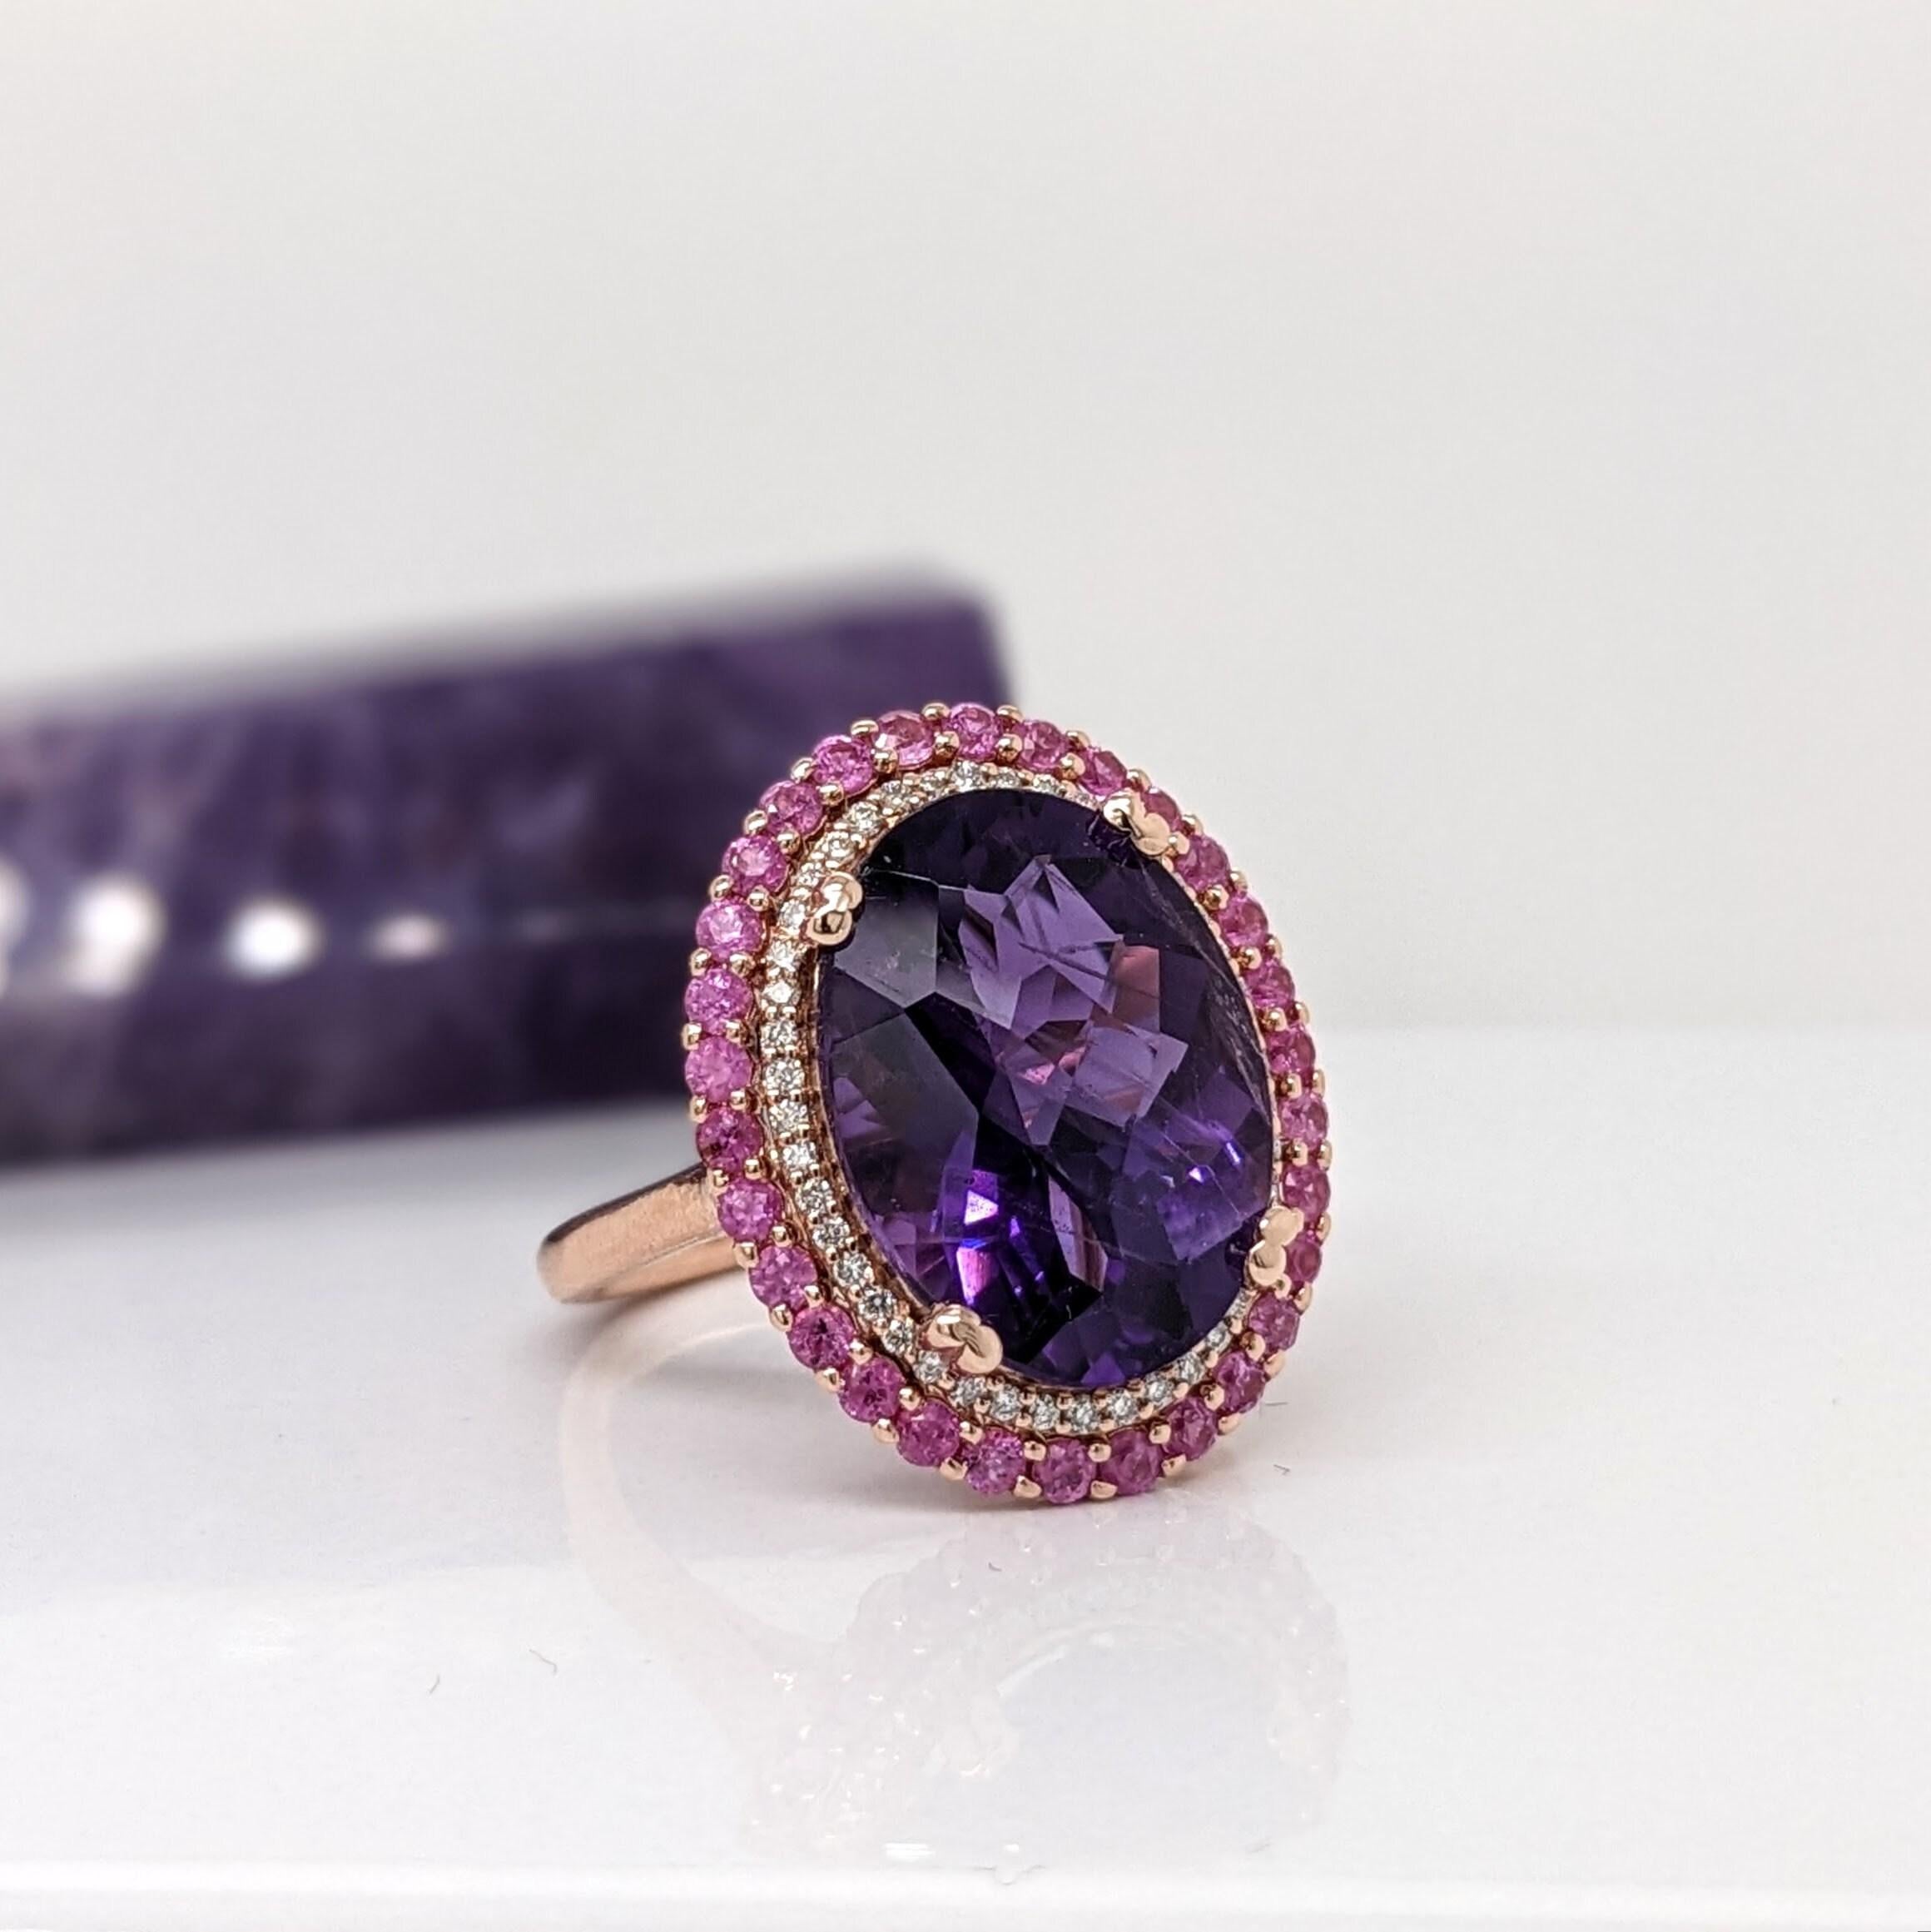 7ct Amethyst Ring w Pink Sapphires & Natural Diamonds in Solid 14K Gold 11x8mm